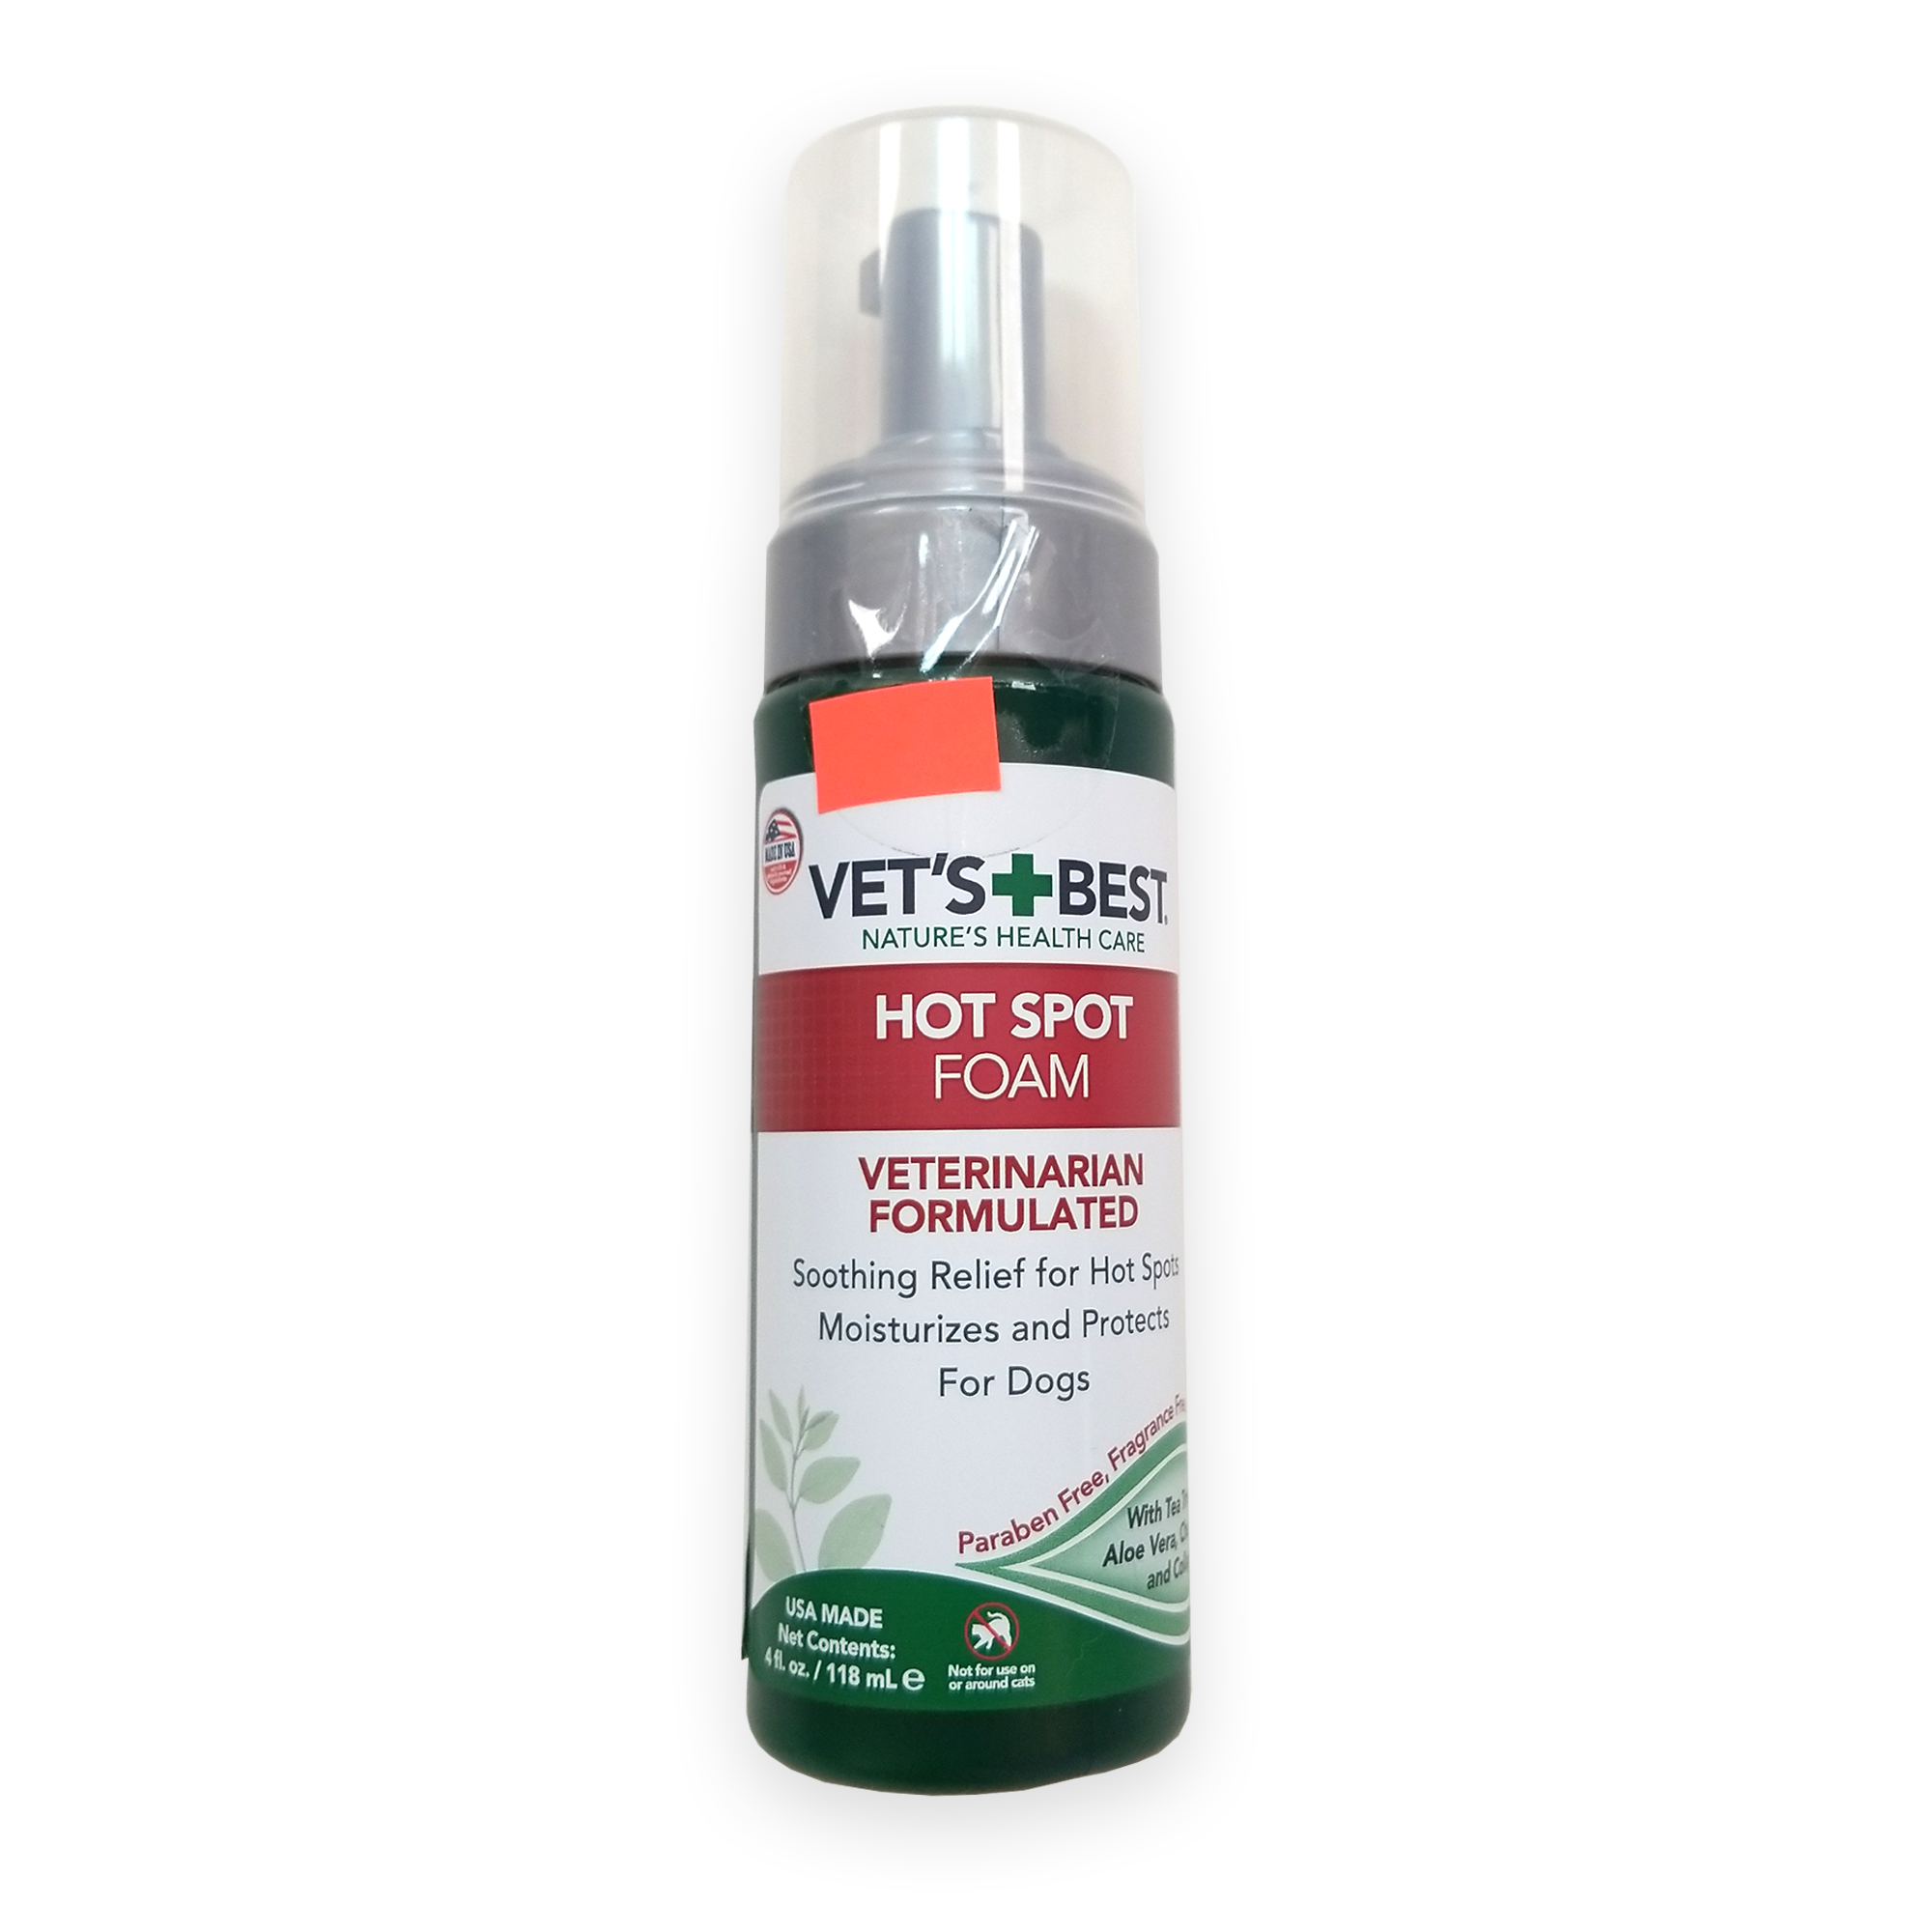 Vets Best Veterinarian Formulated Hot Spot Foam Moisturizers and Protects (118ml)